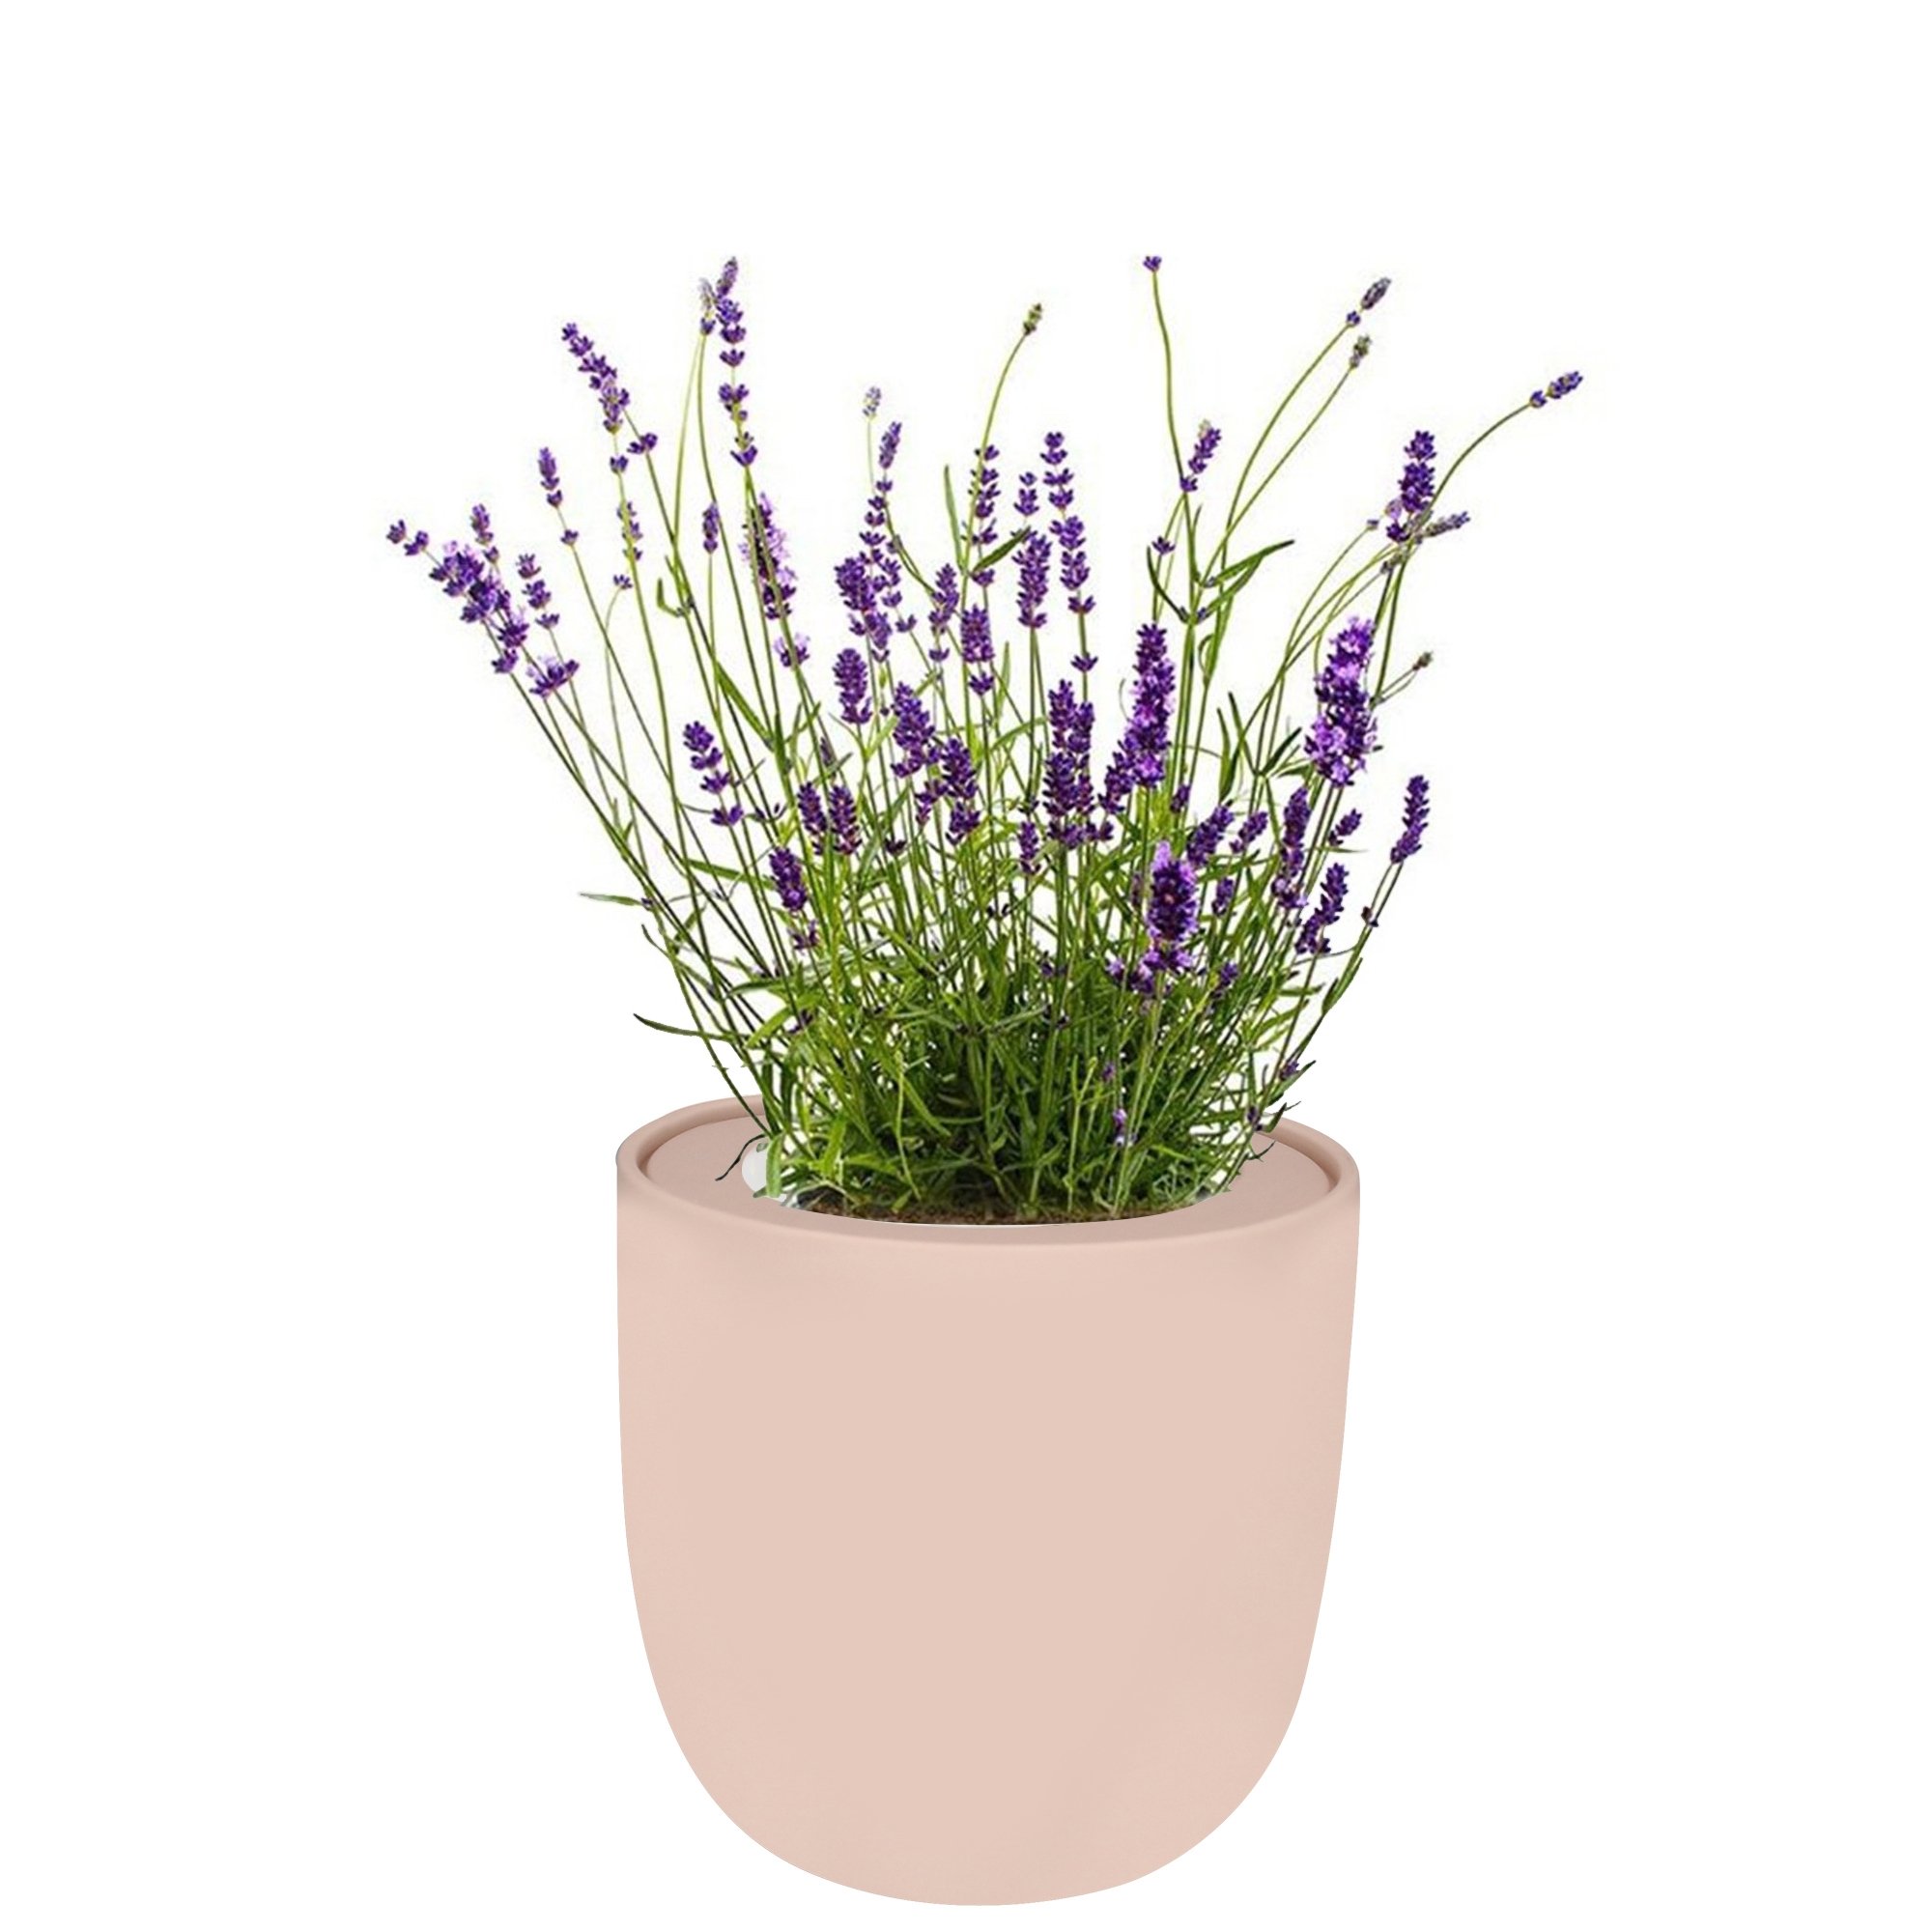 Lavender Pink Ceramic Pot Hydroponic Growing Kit with Seeds